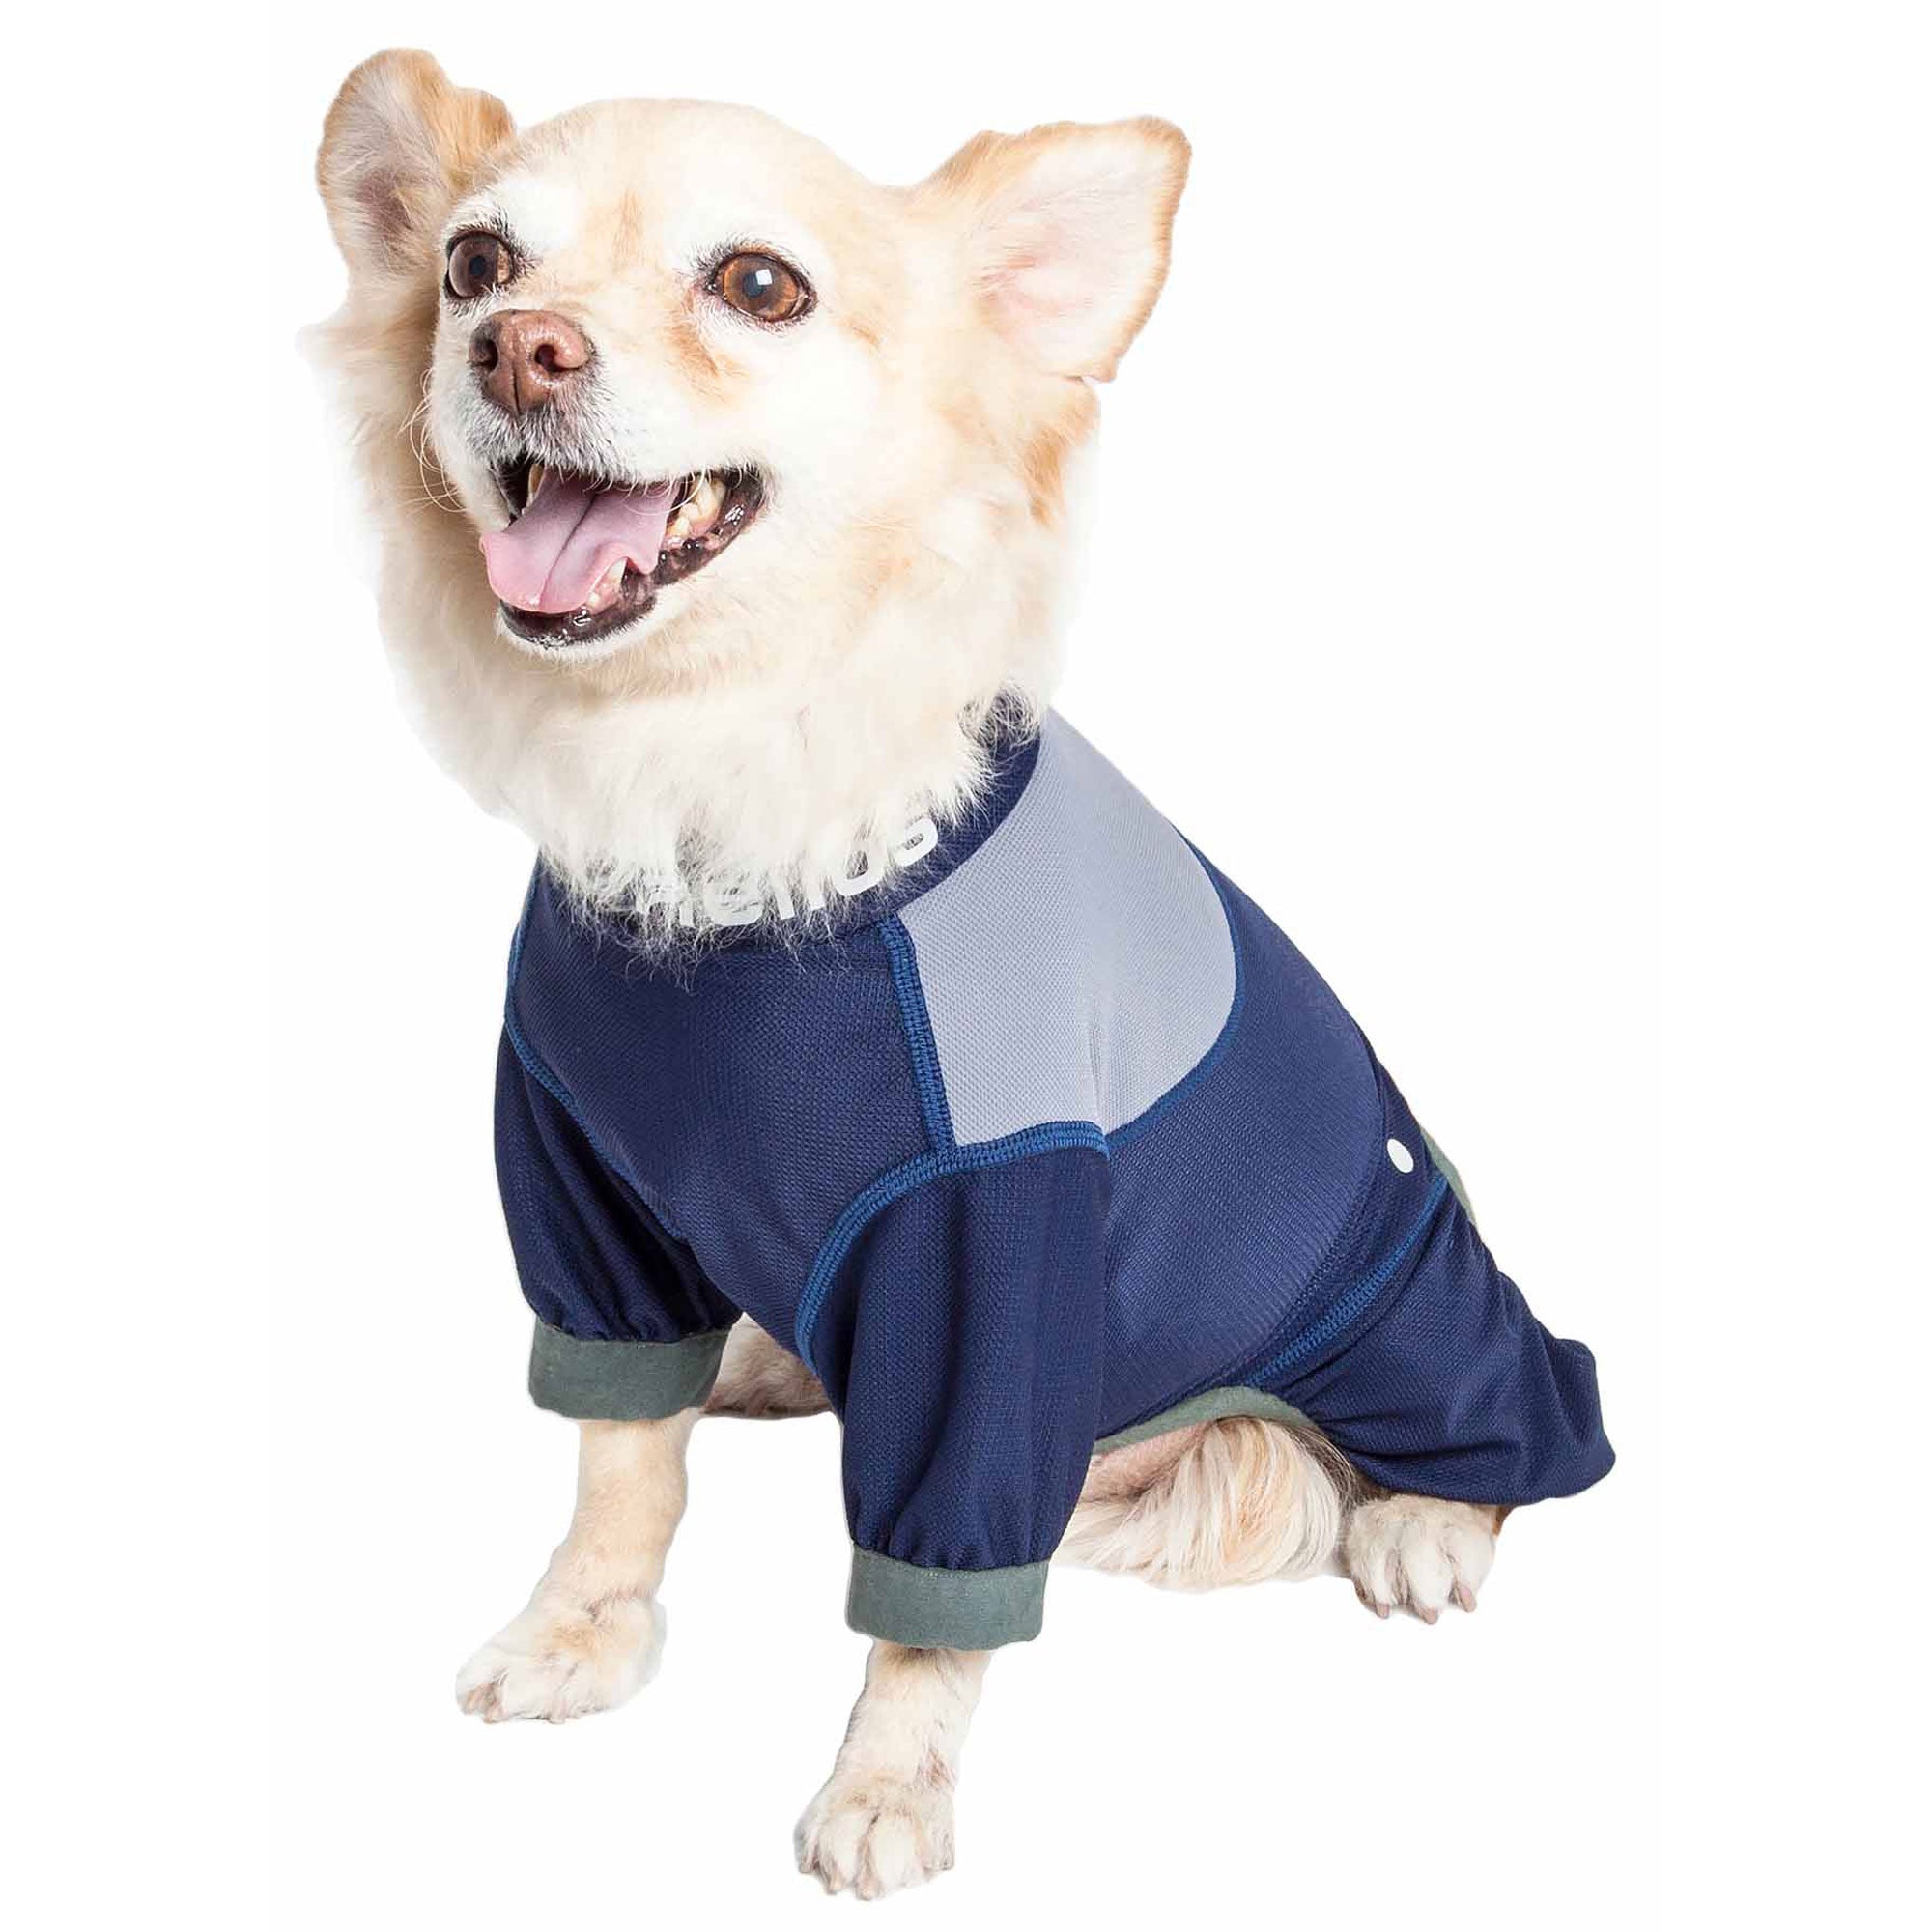 Dog Helios® Tail Runner Dog Track Suit - Blue & Gray - X-Large